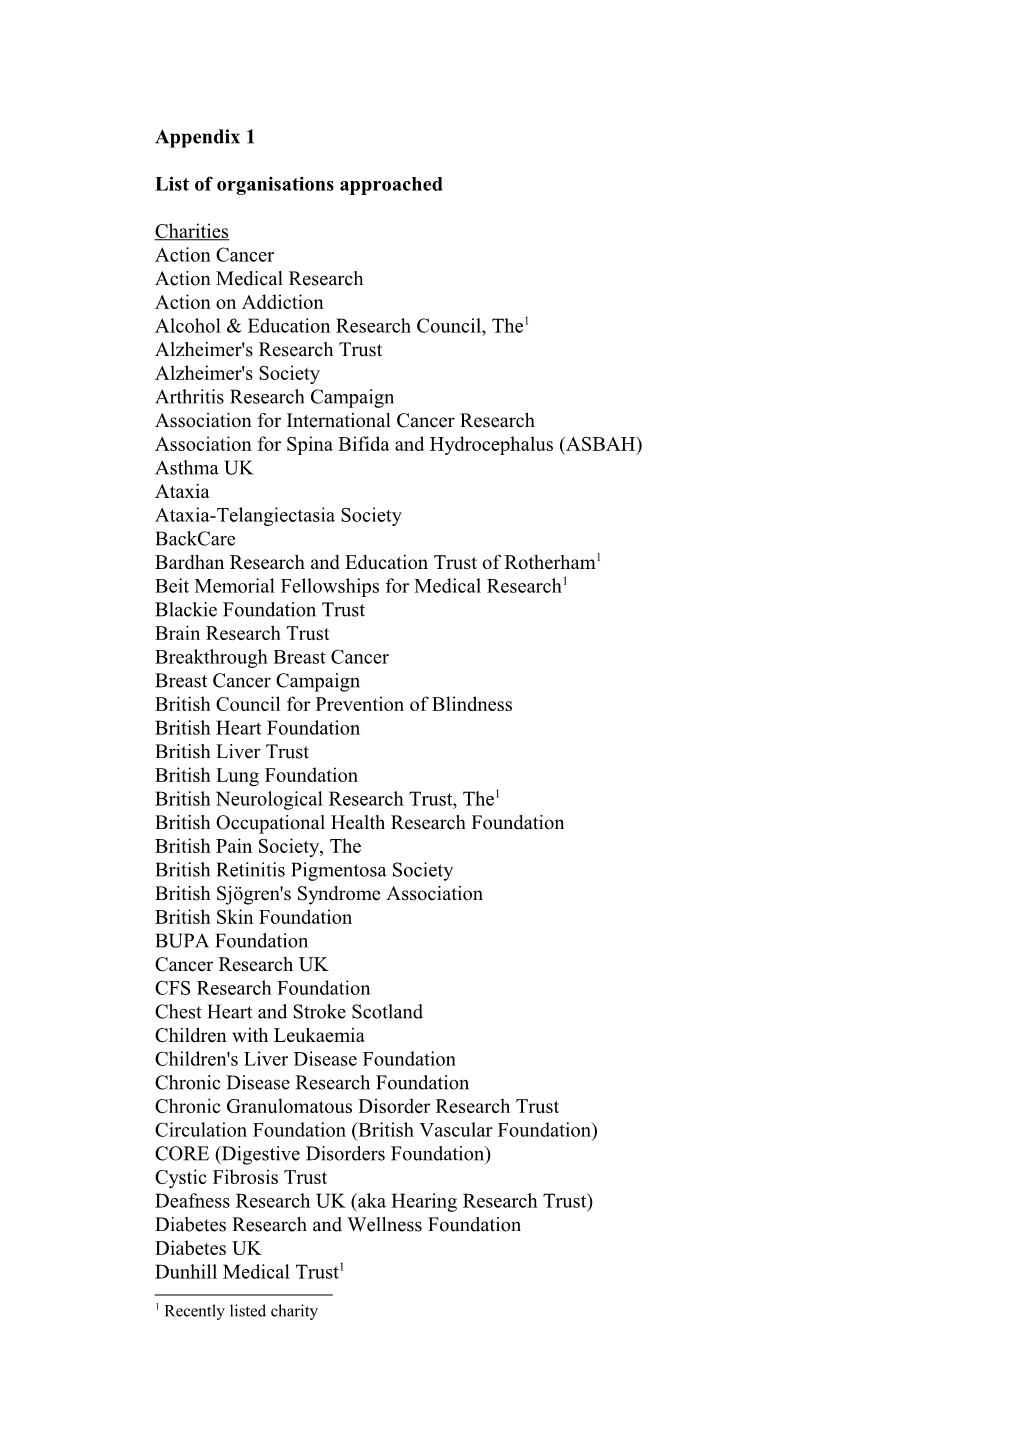 List of Organisations Approached